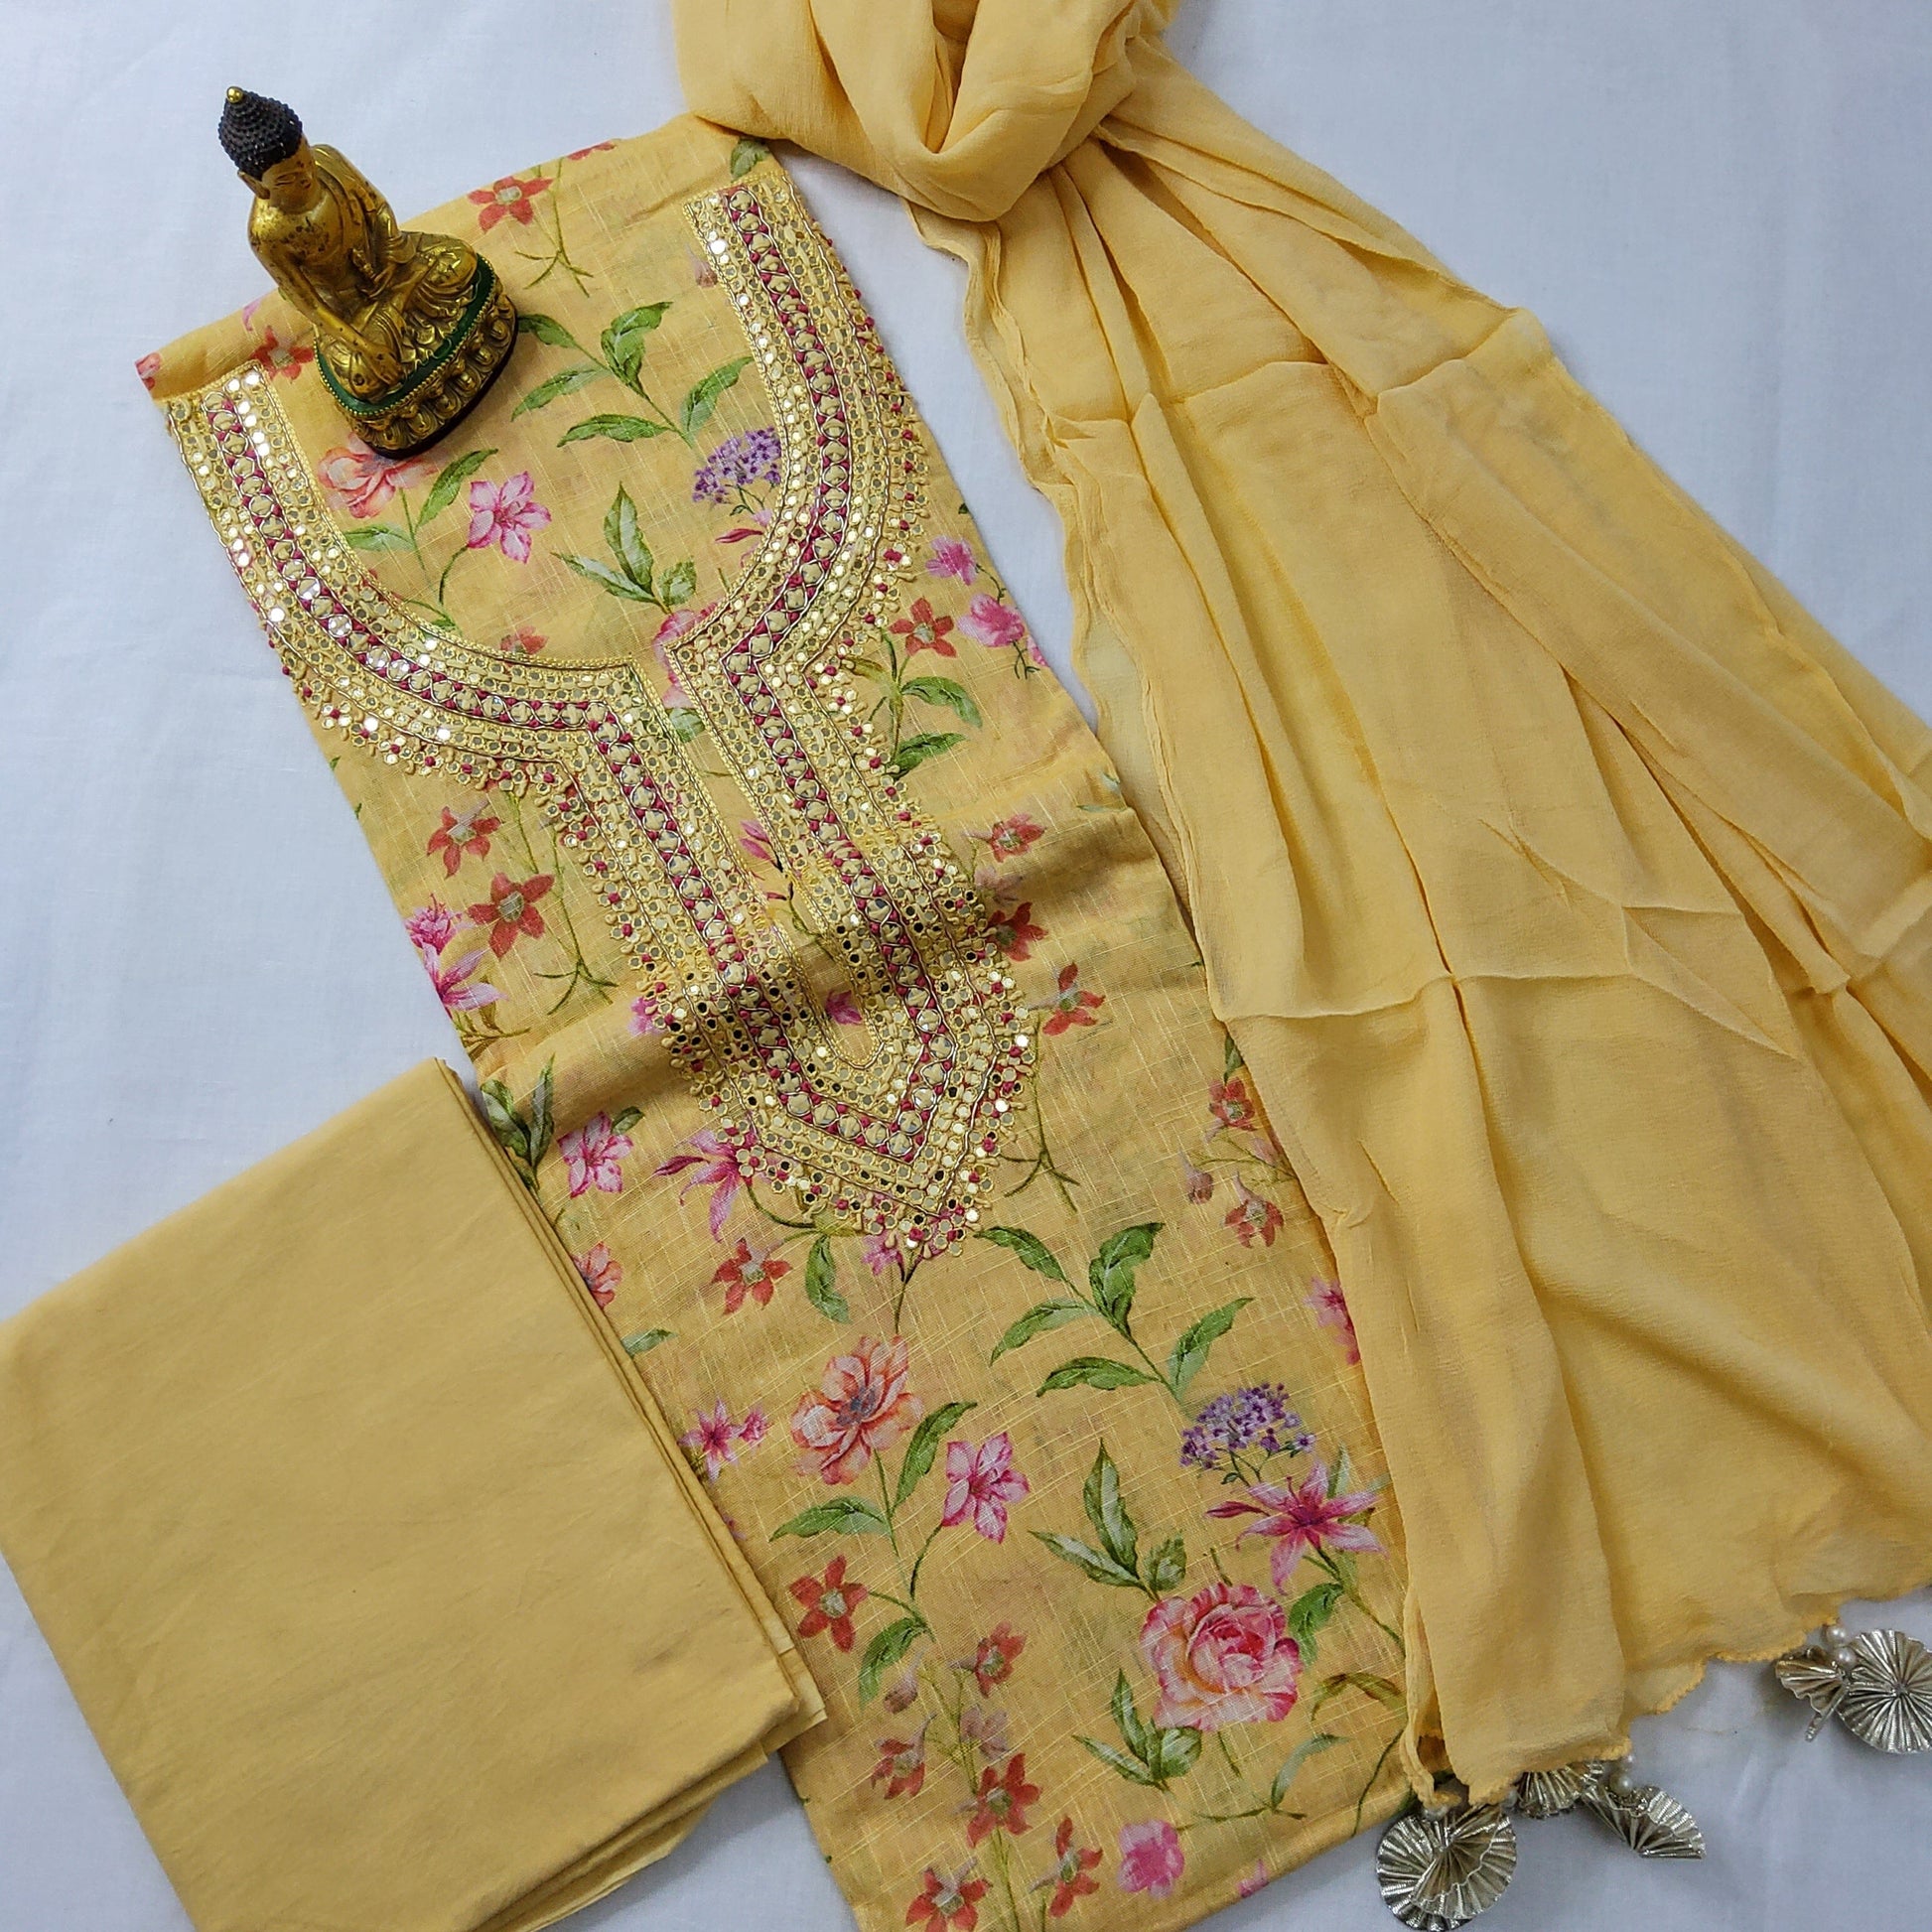 Linen Floral Print Dress Material with handwork